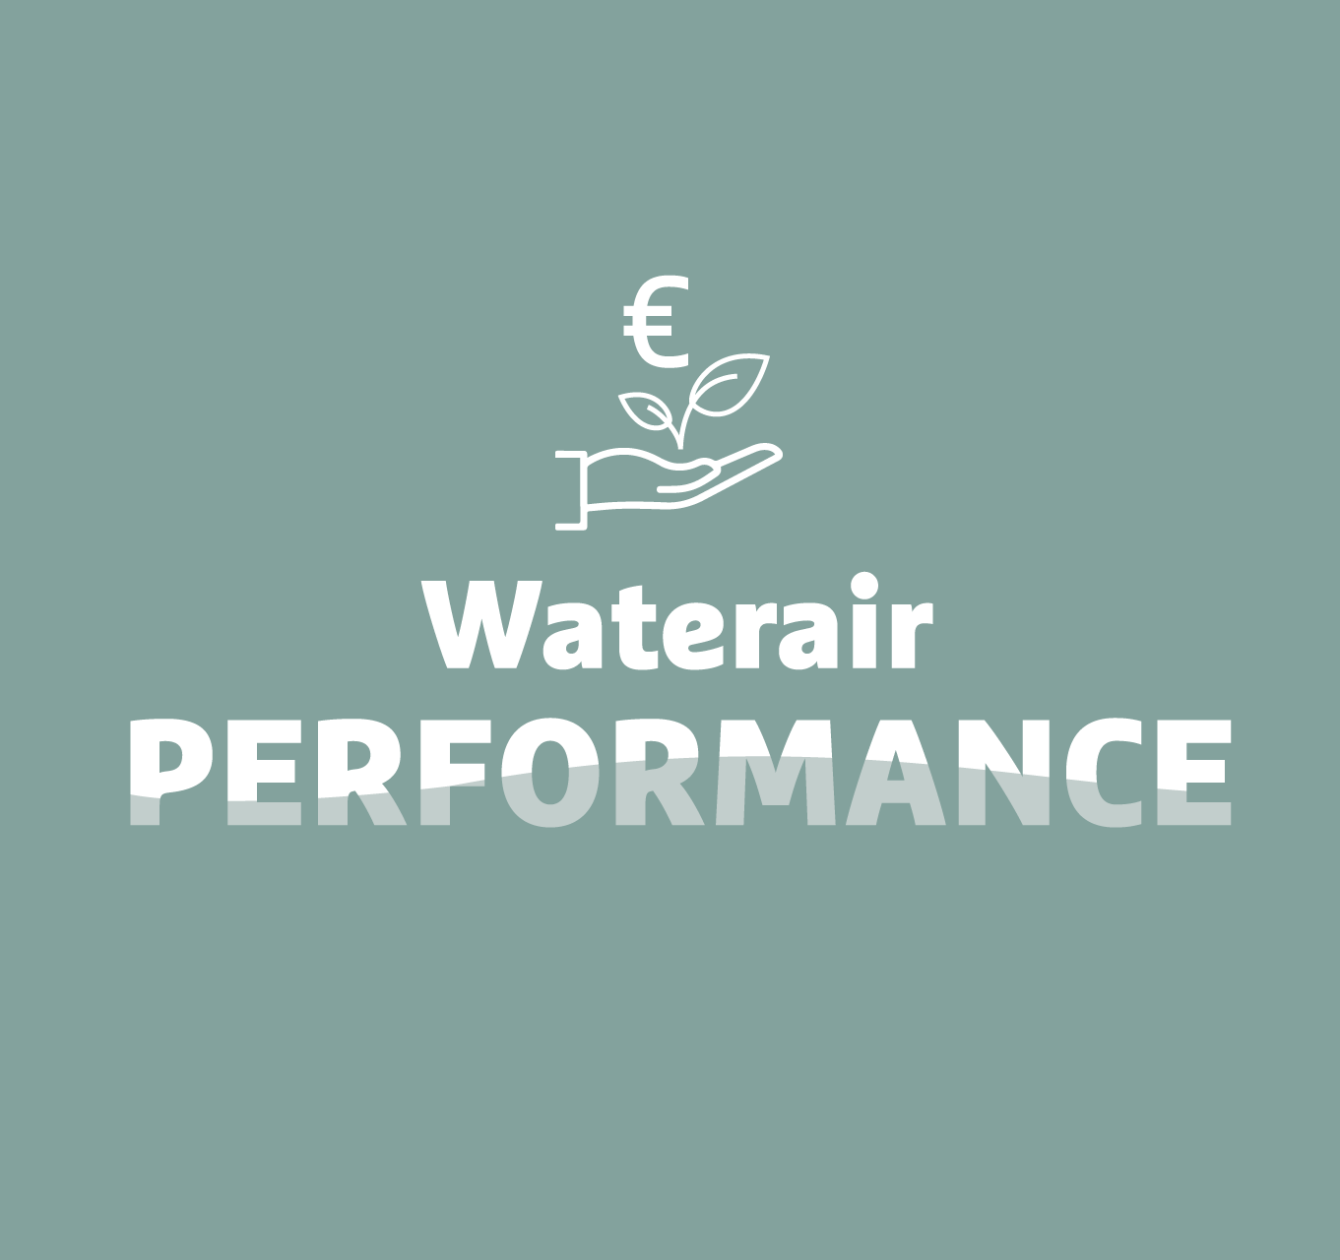 Waterair Performance: your economical and eco-friendly pool